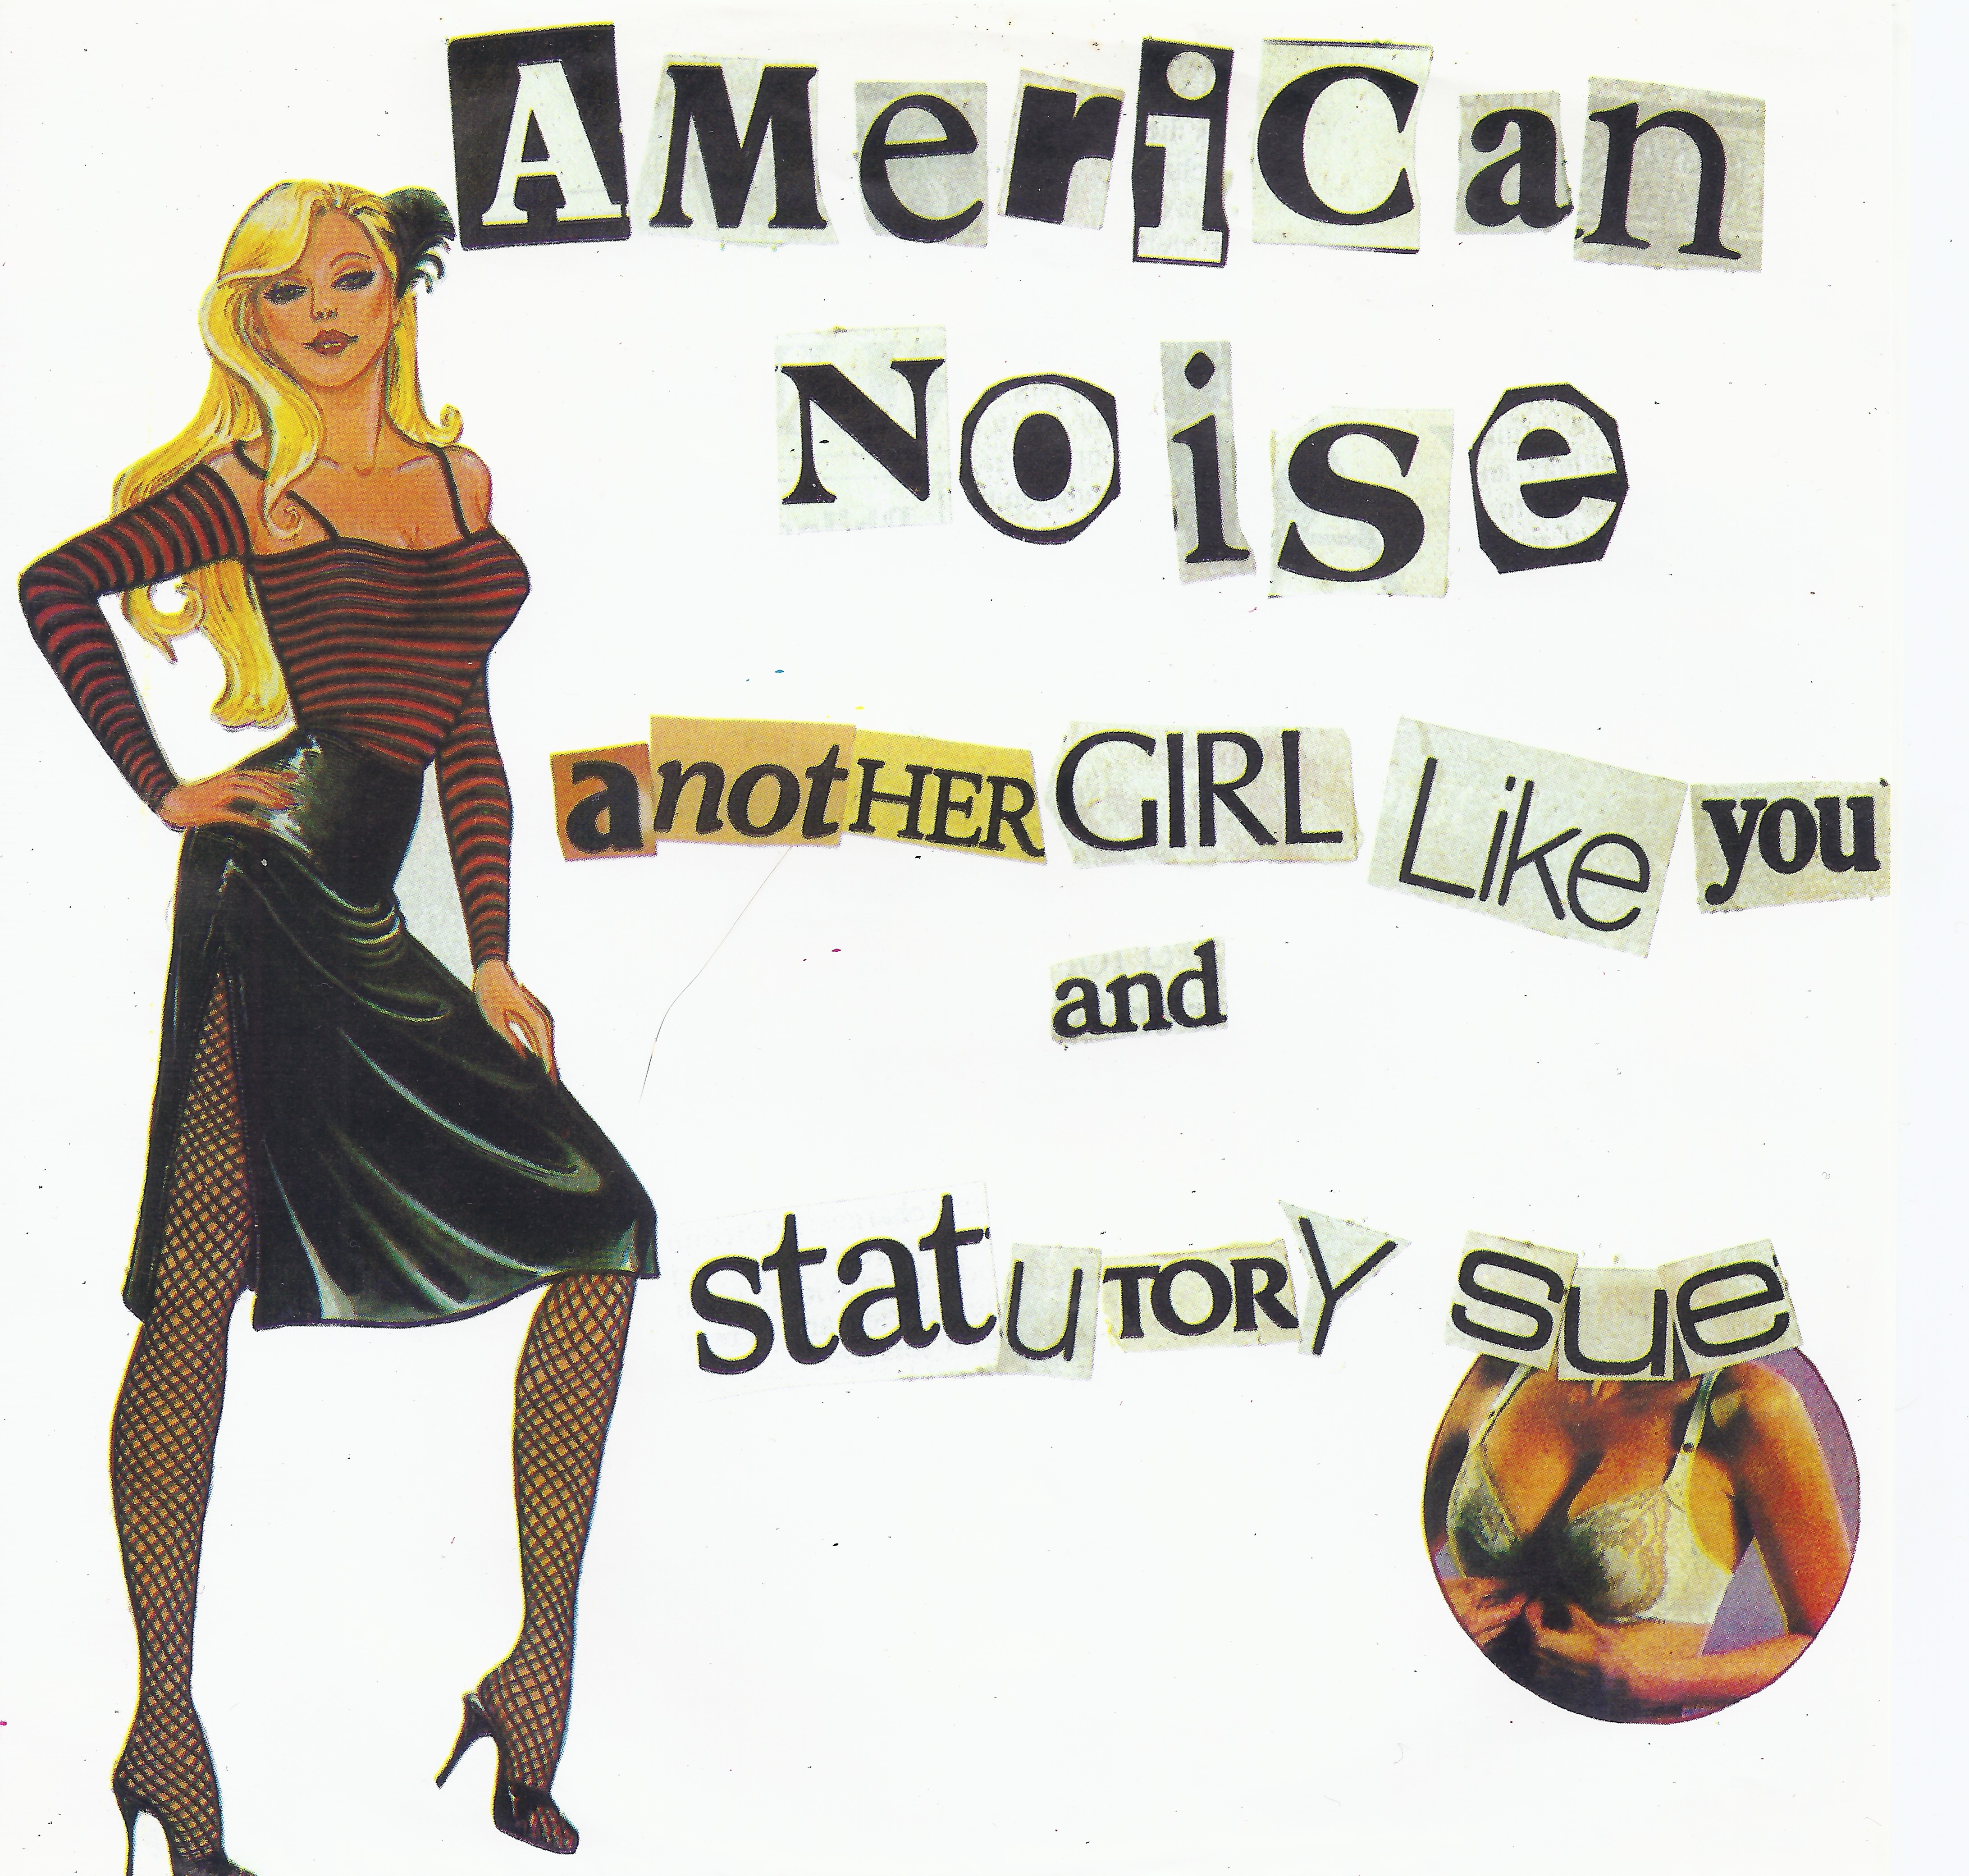 Art for Statutory Sue by American Noise